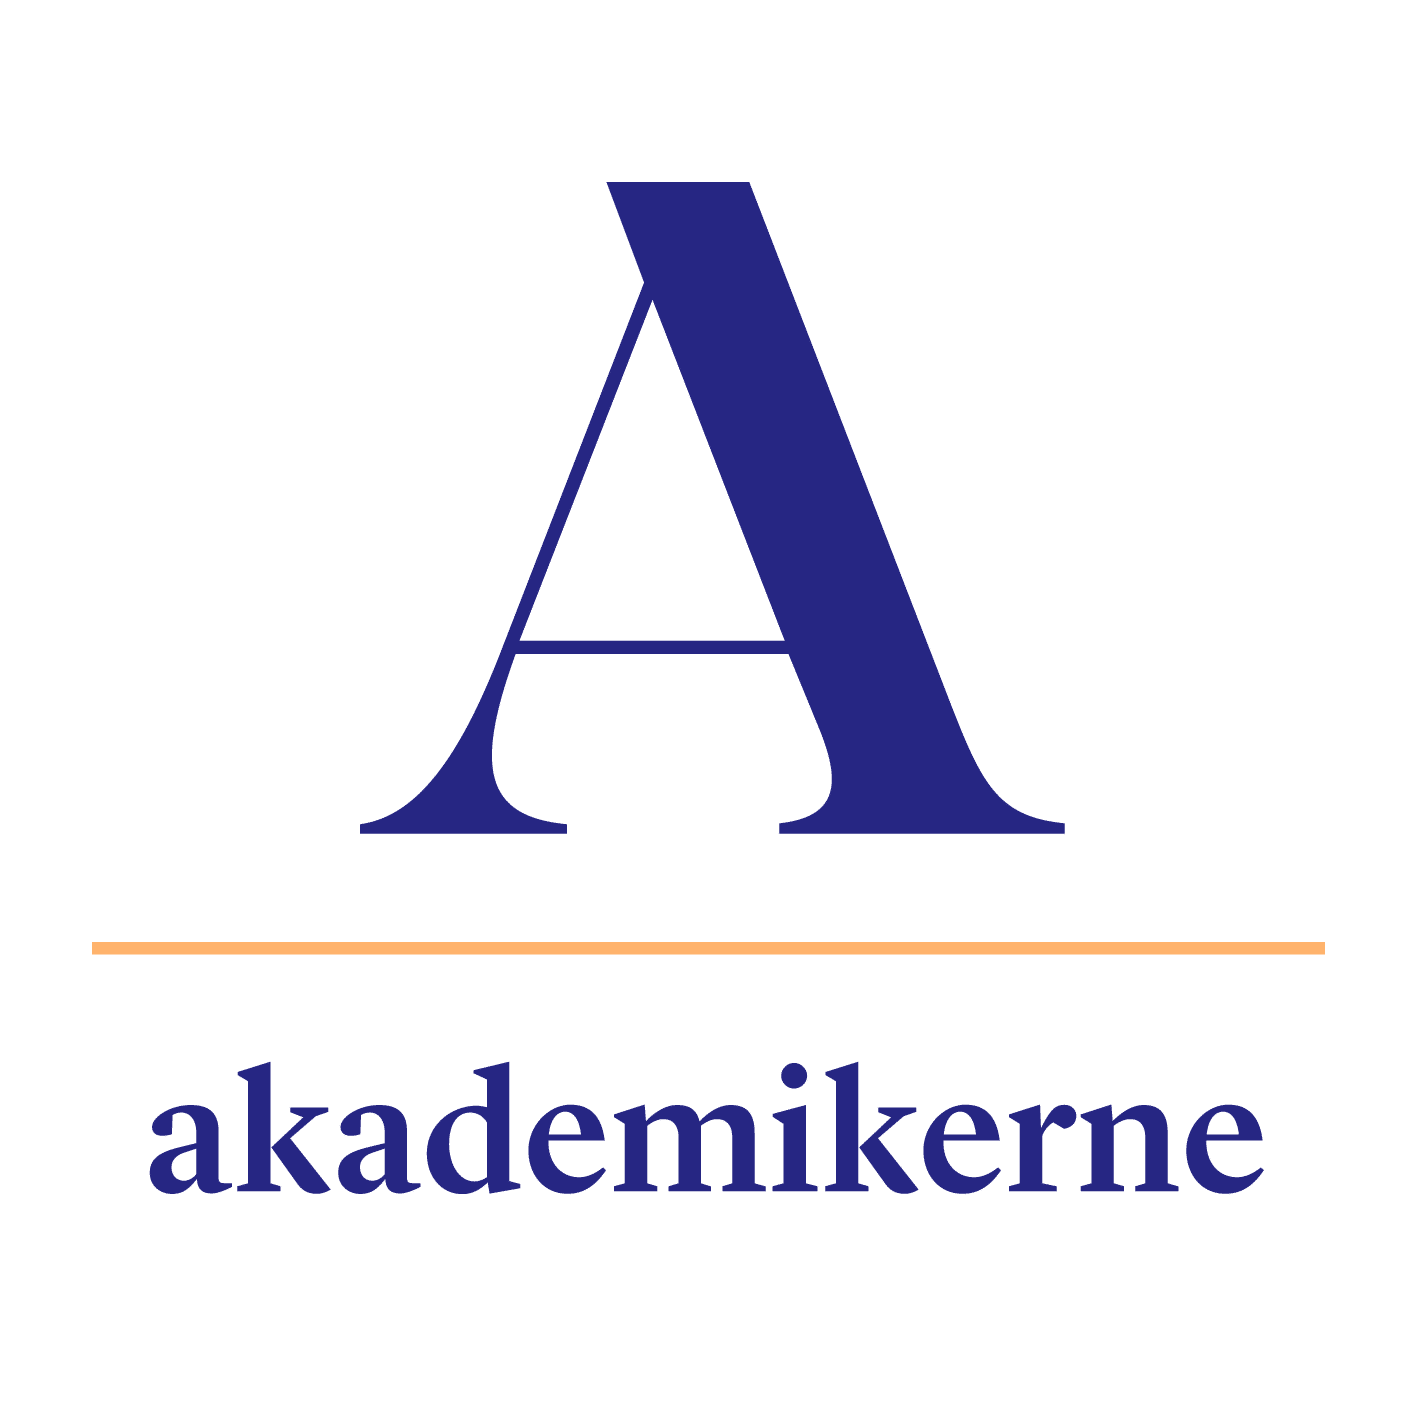 Akademikerne - The Federation of Norwegian Professional Associations